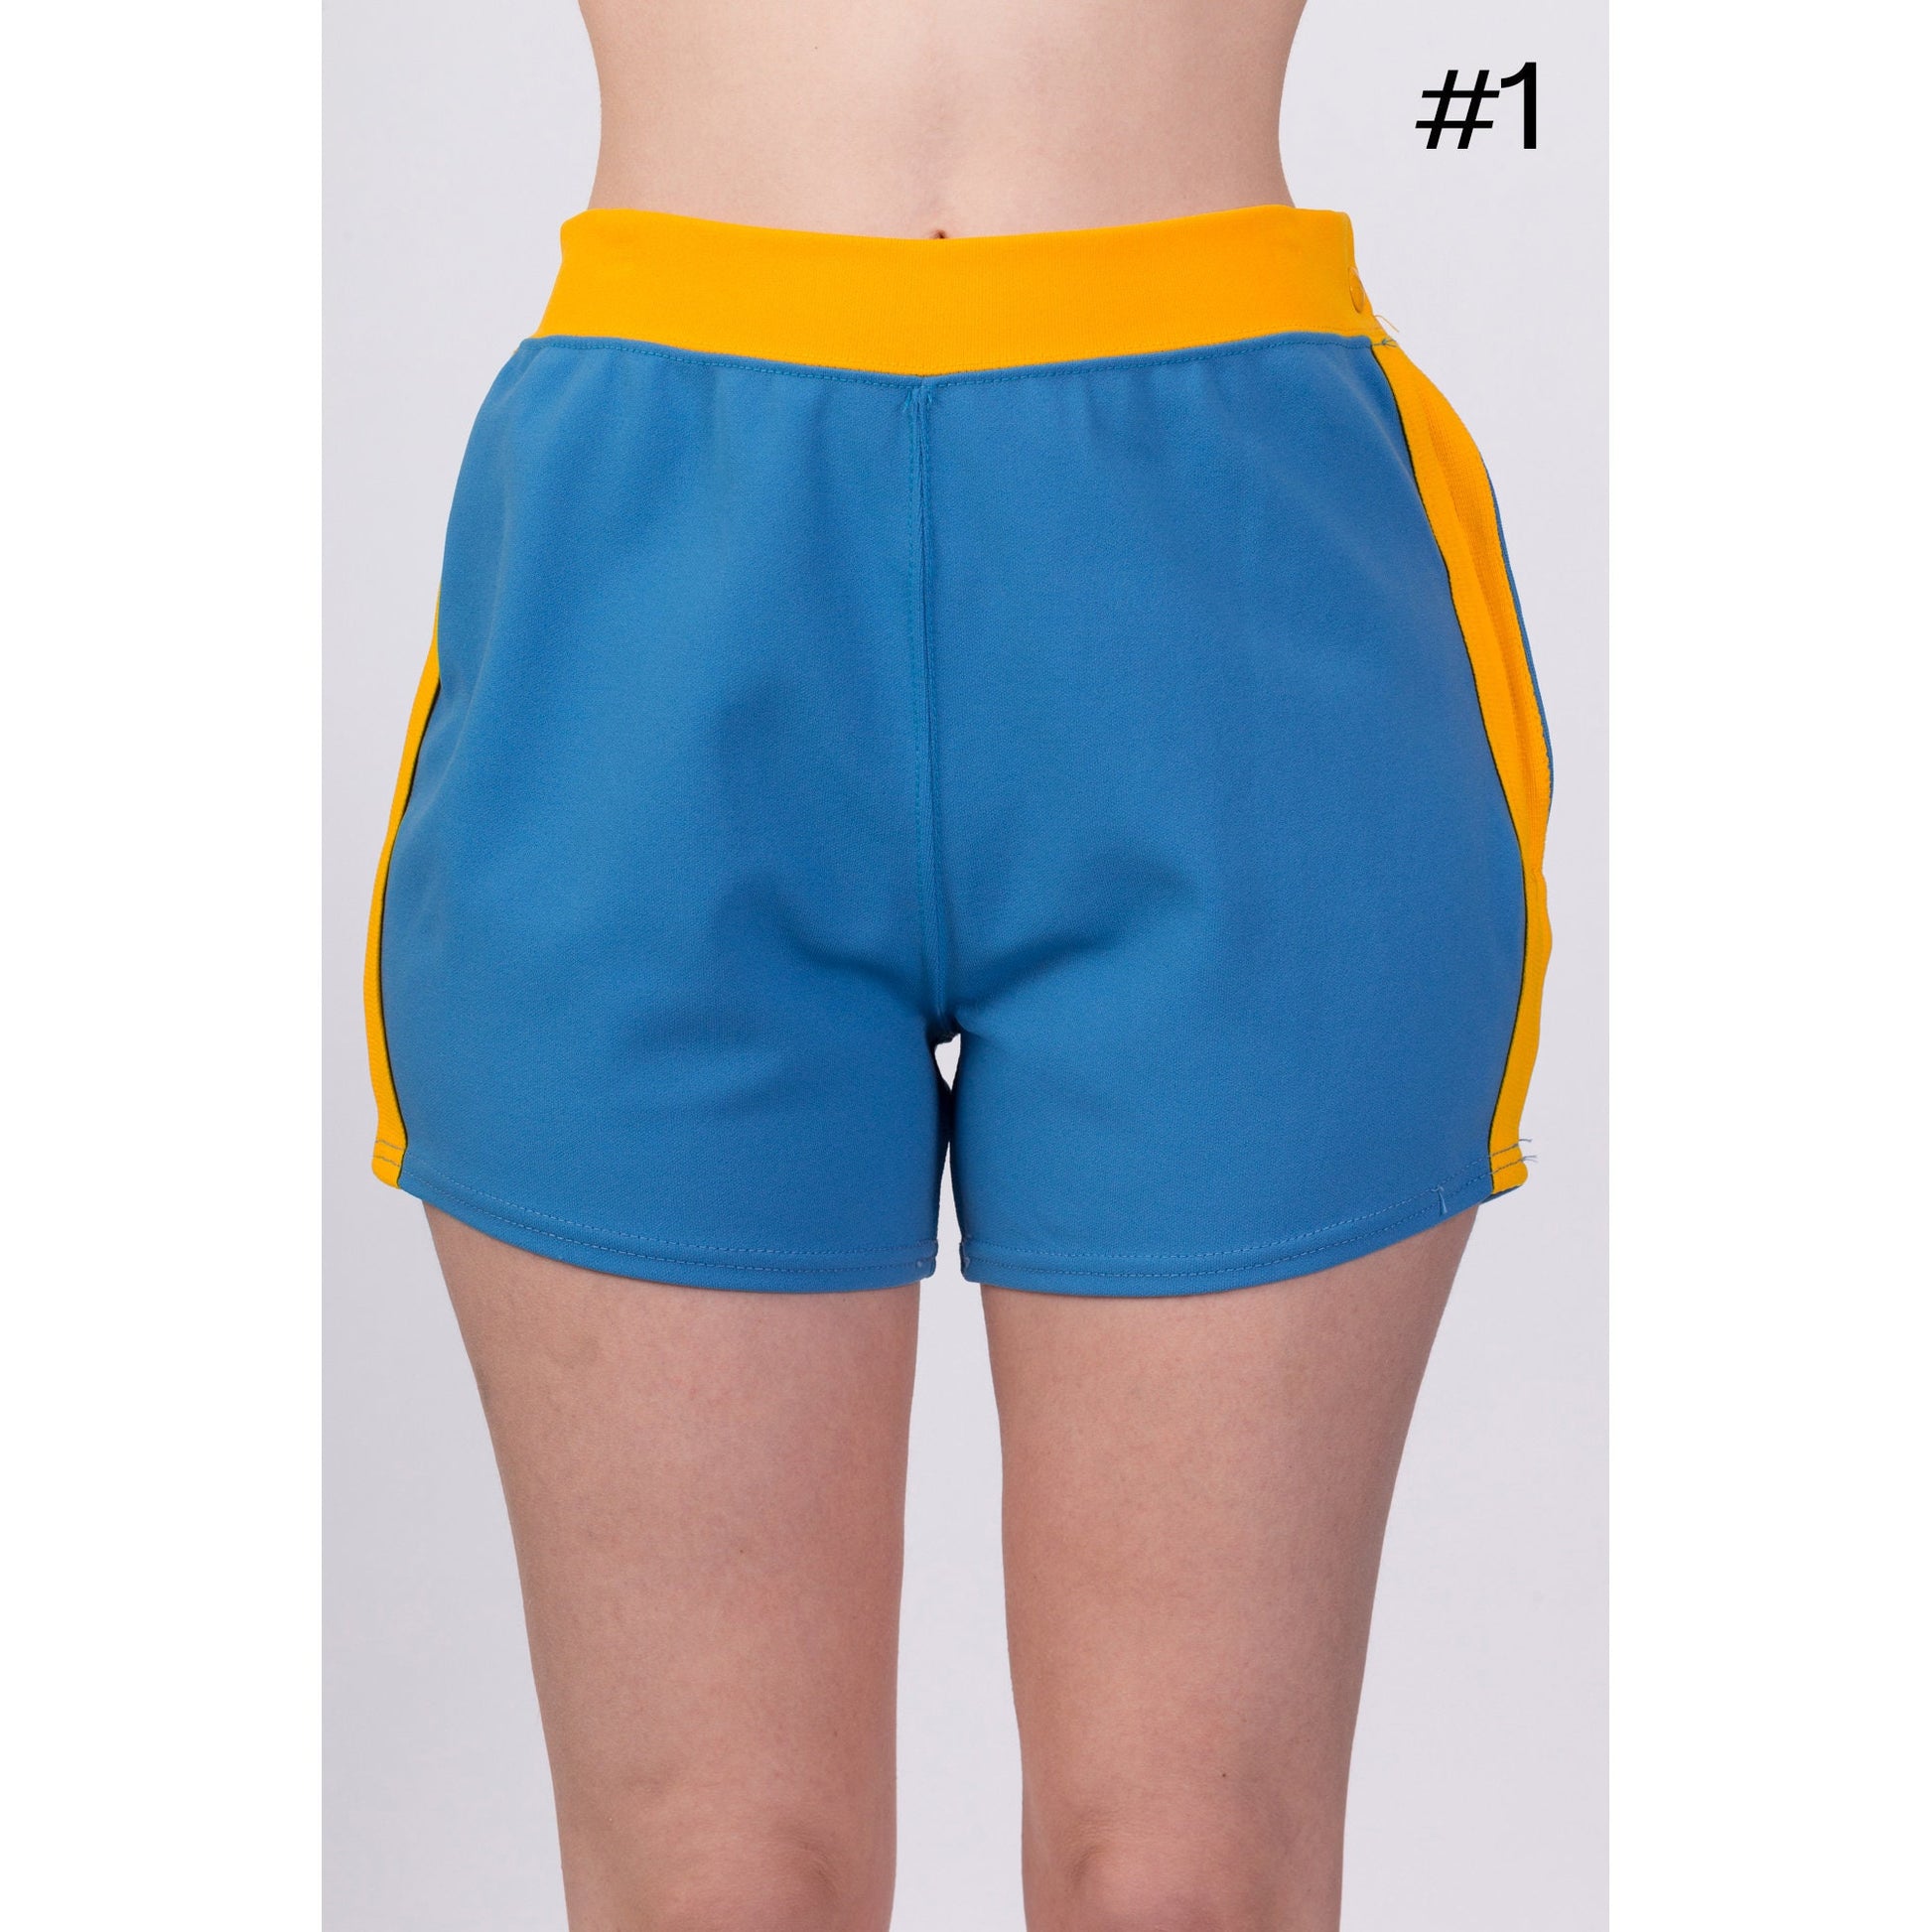 70s Blue Striped Unisex Athletic Shorts - Small to Large – Flying